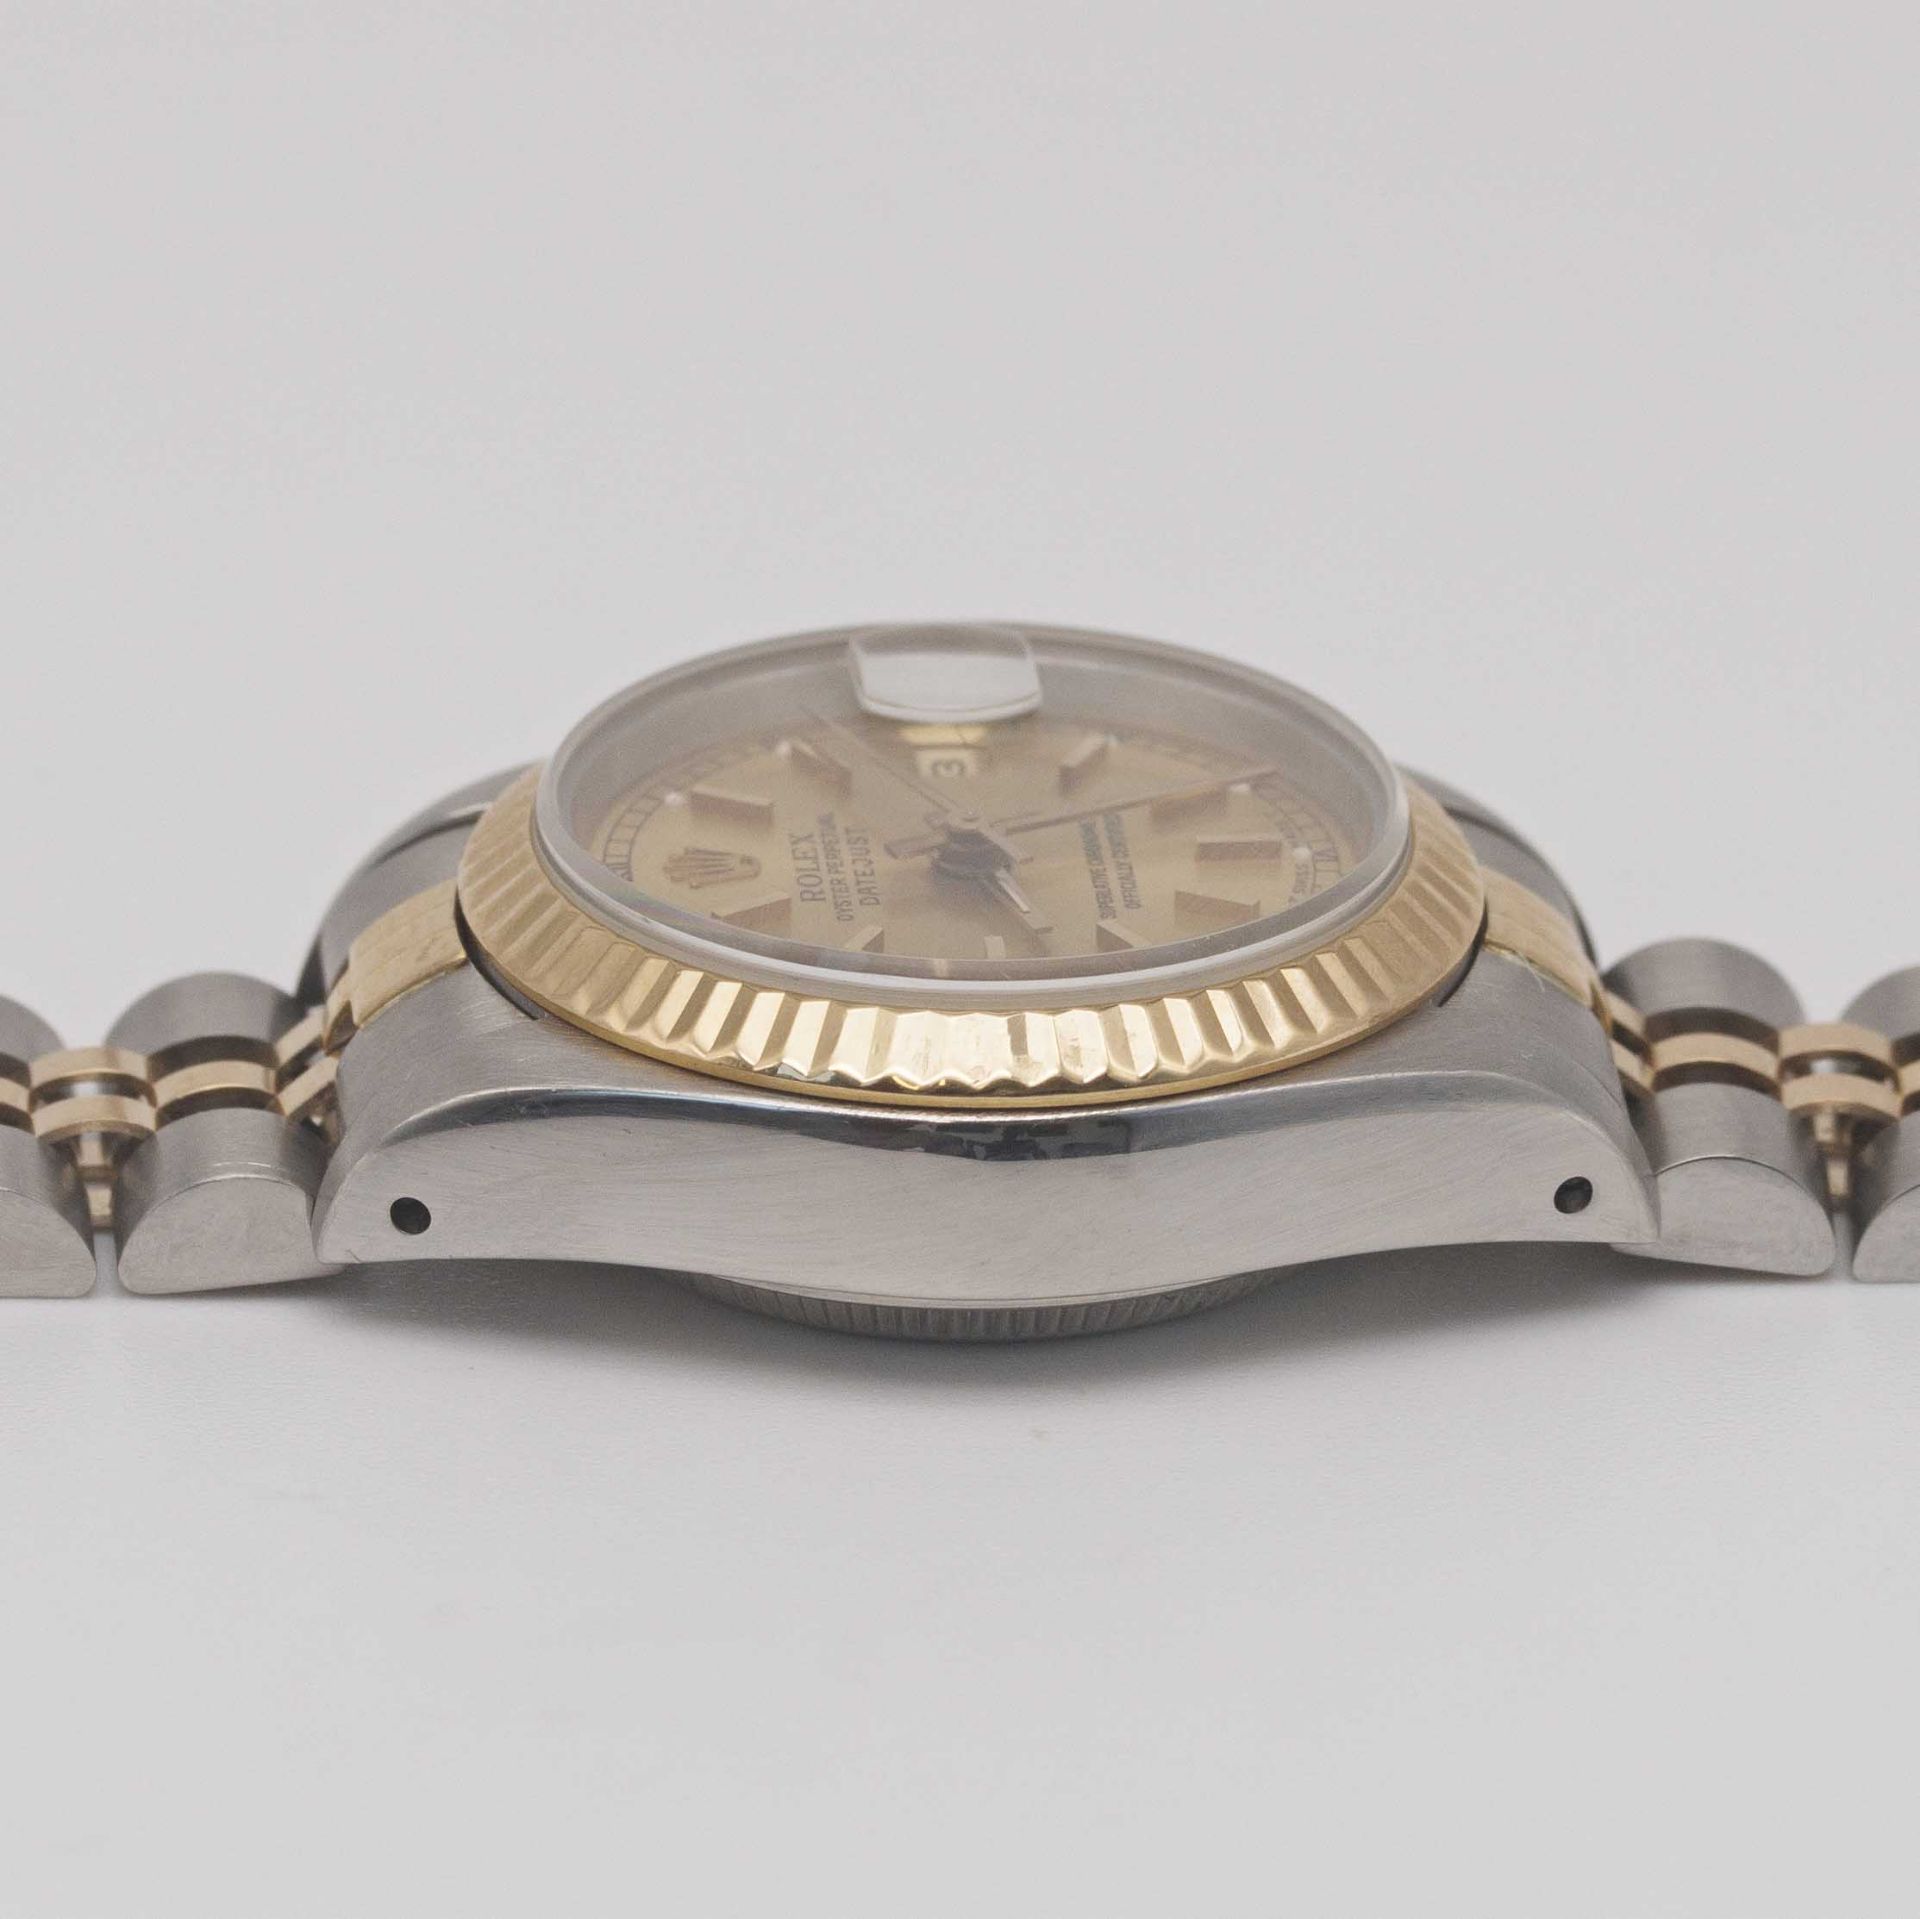 A LADIES STEEL & GOLD ROLEX OYSTER PERPETUAL DATEJUST BRACELET WATCH CIRCA 2000, REF. 69173 WITH - Image 9 of 12